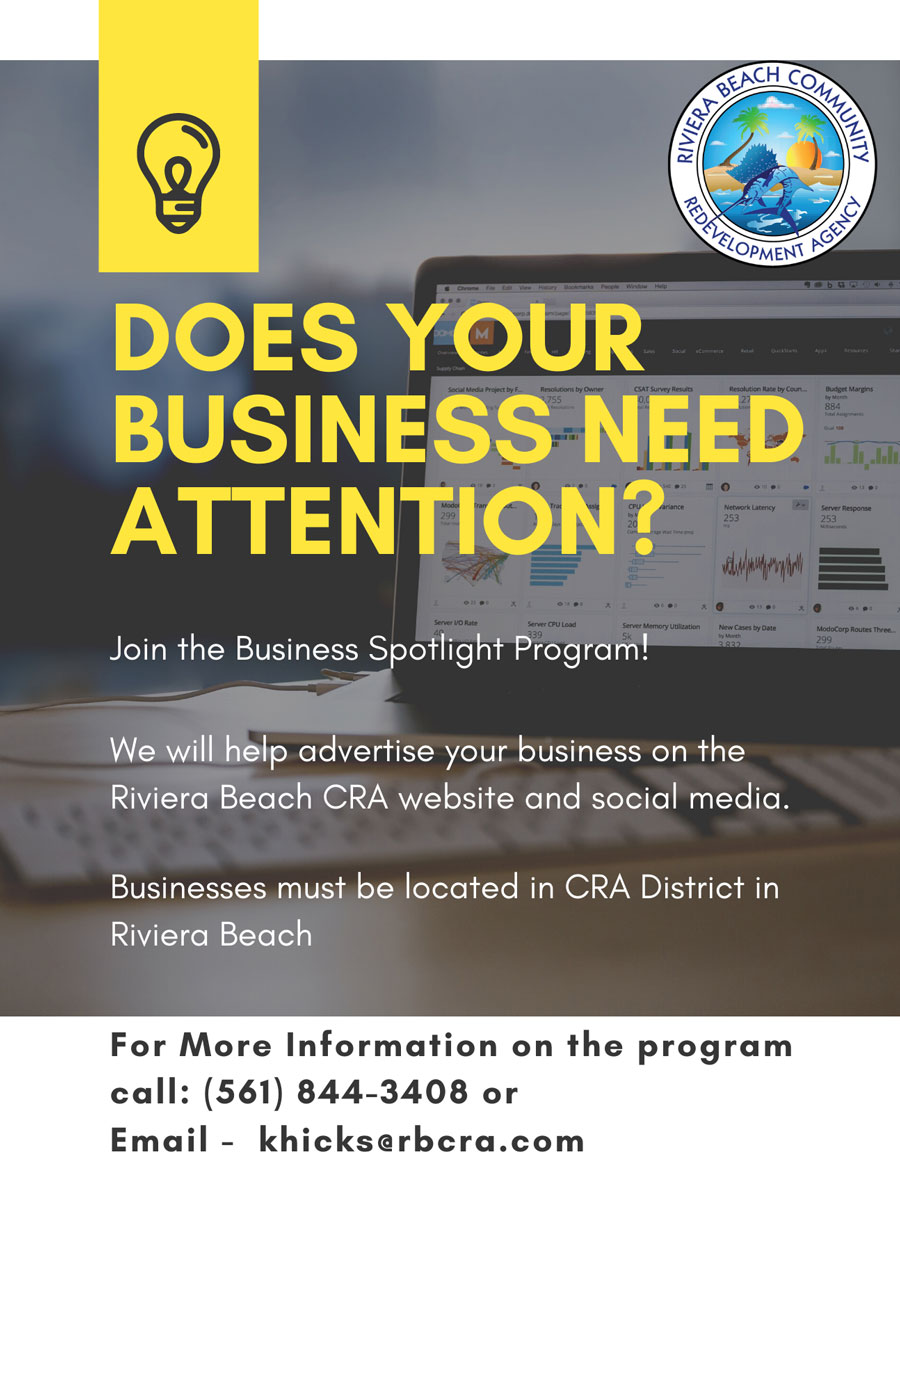 Does Your Business Need Attention? Join our business spotlight program contact us at 561-844-3408